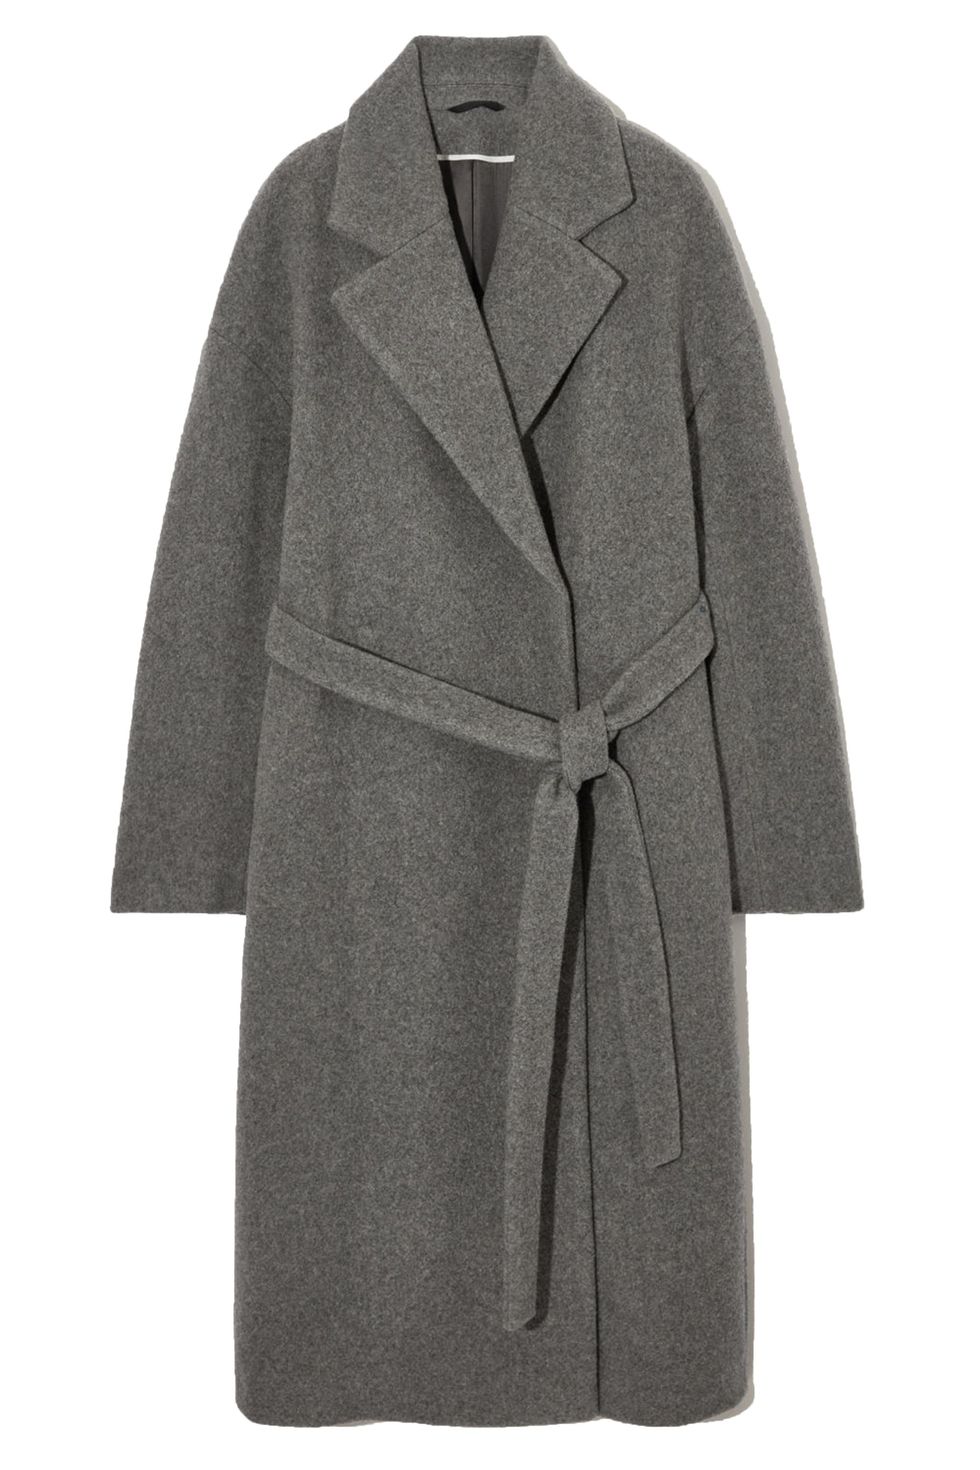 10 of the best dressing-gown coats to shop